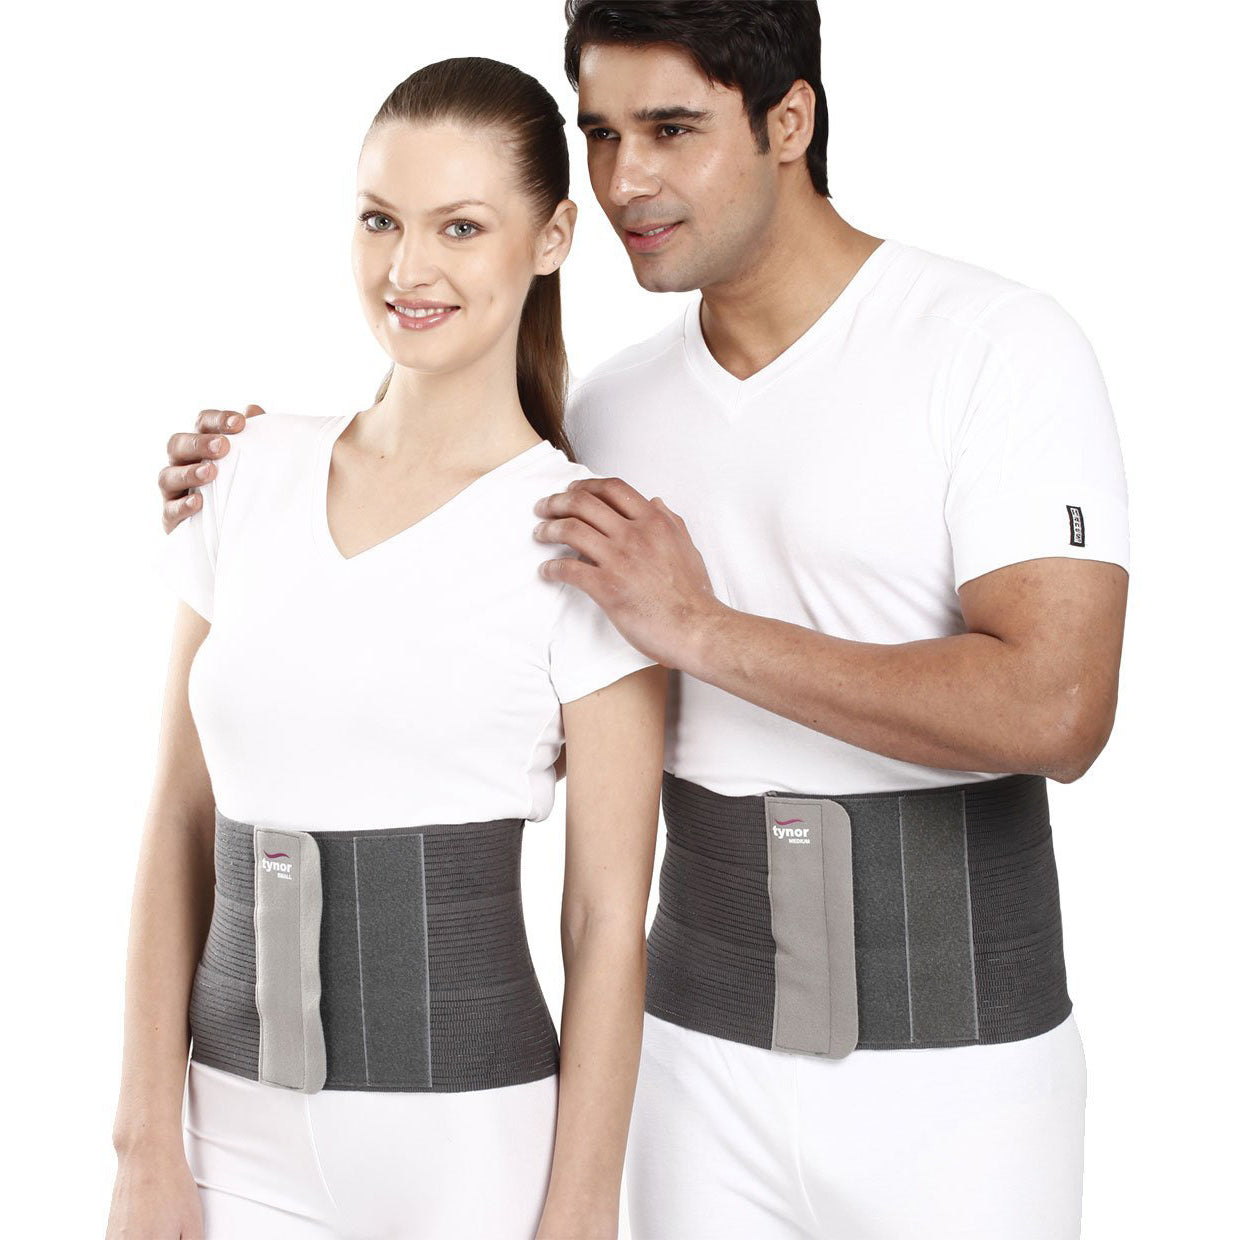 Buy umbilical hernia support belt Wholesale From Experienced Suppliers 